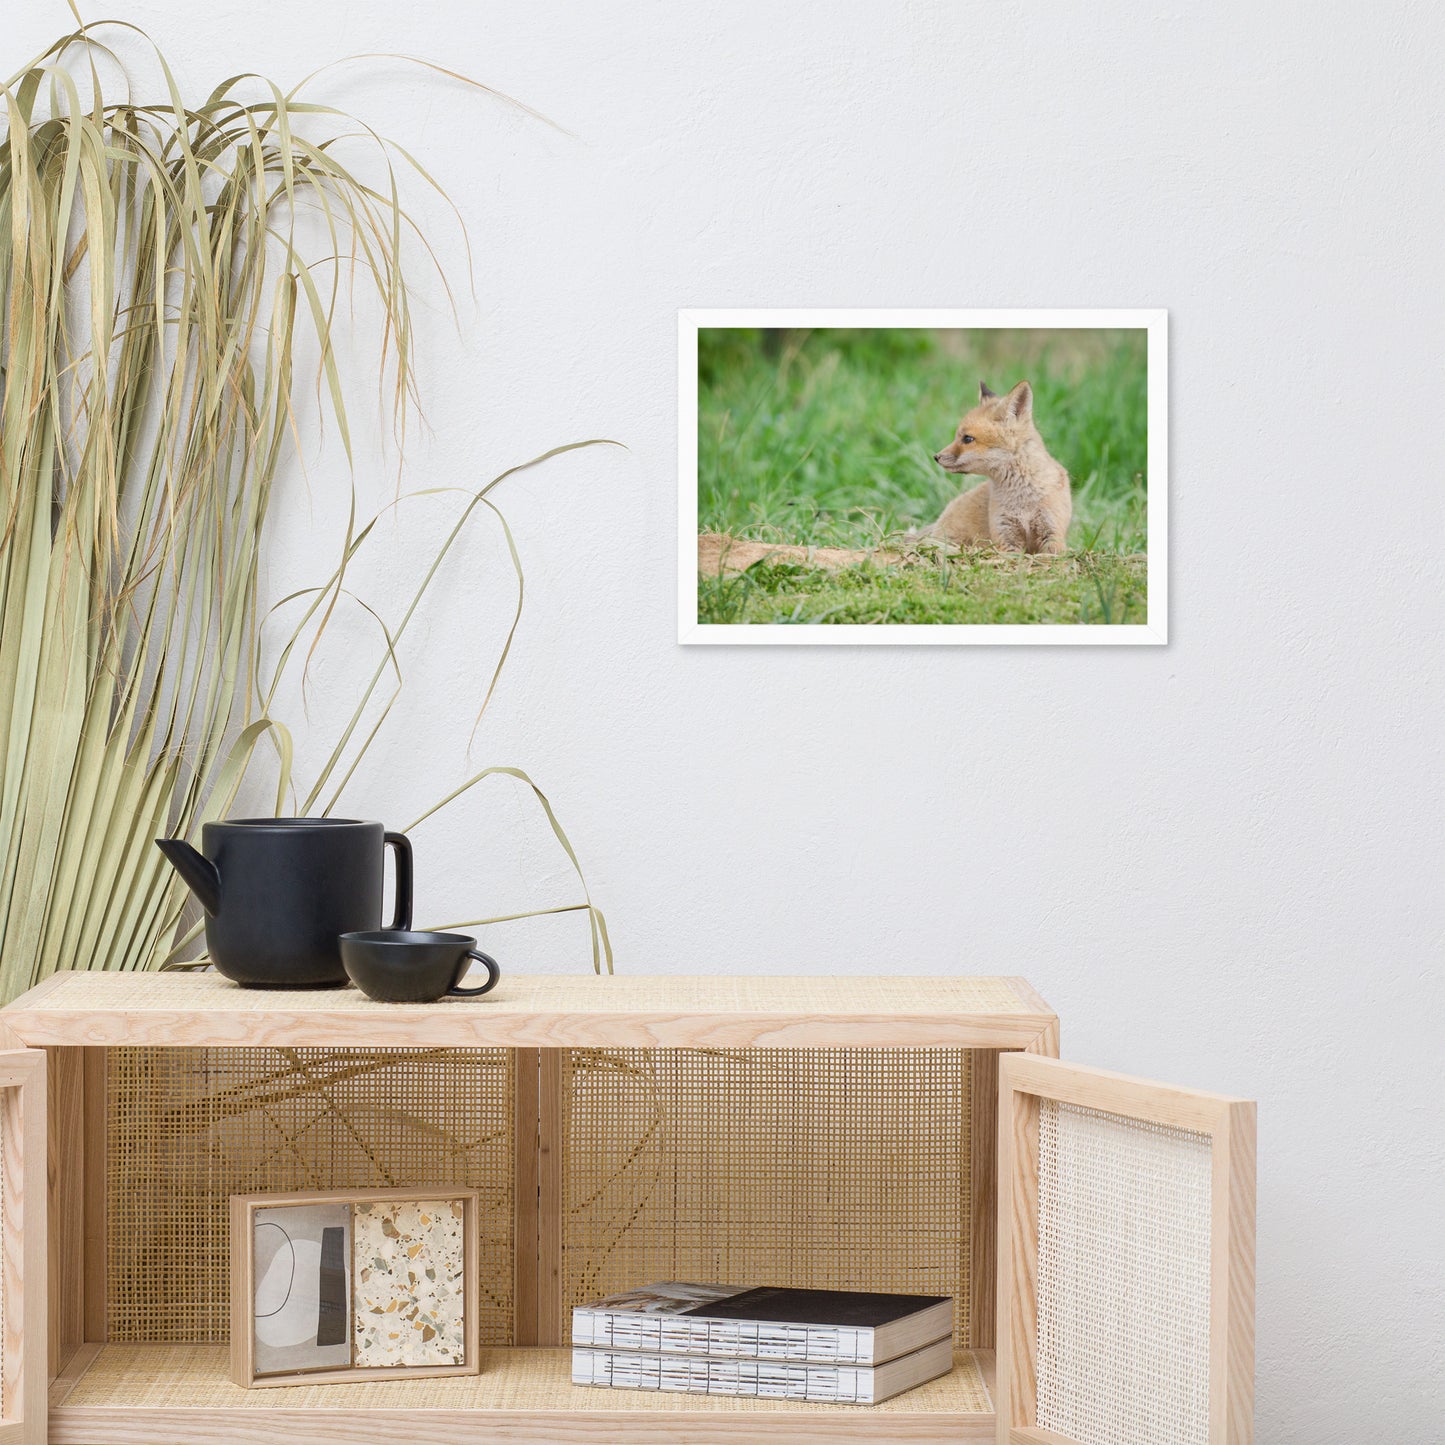 Best Prints For Bedroom: Red Fox Pups - Chilling/ Animal / Wildlife / Nature Photographic Artwork - Framed Artwork - Wall Decor